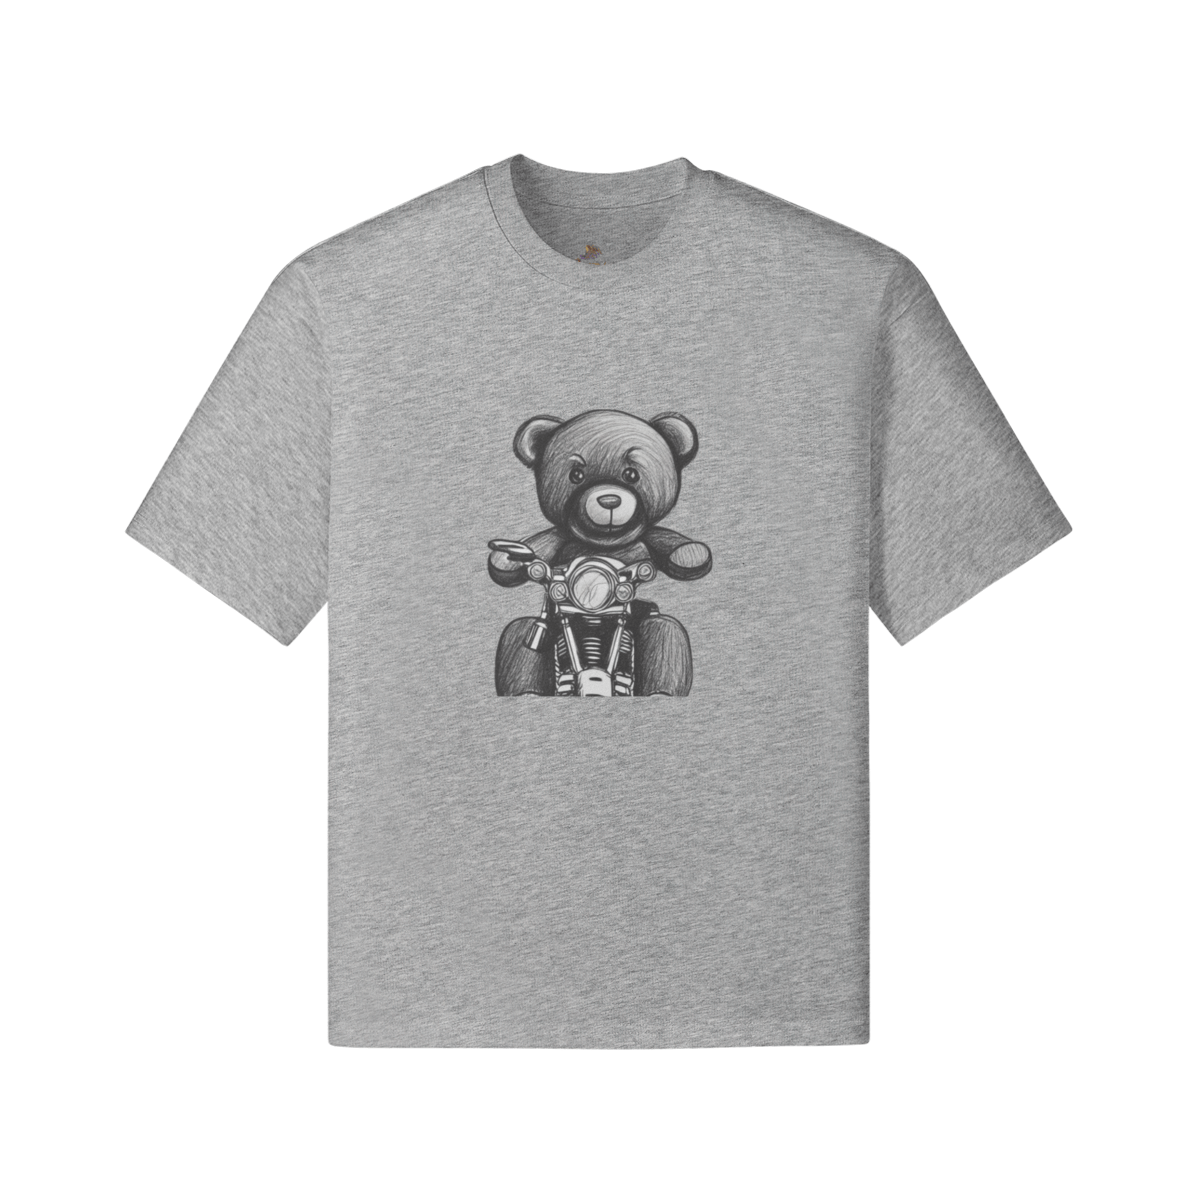 Spend Gray - Teddy Ride 240GSM Unisex Boxy T-shirt - unisex t-shirt at TFC&H Co.